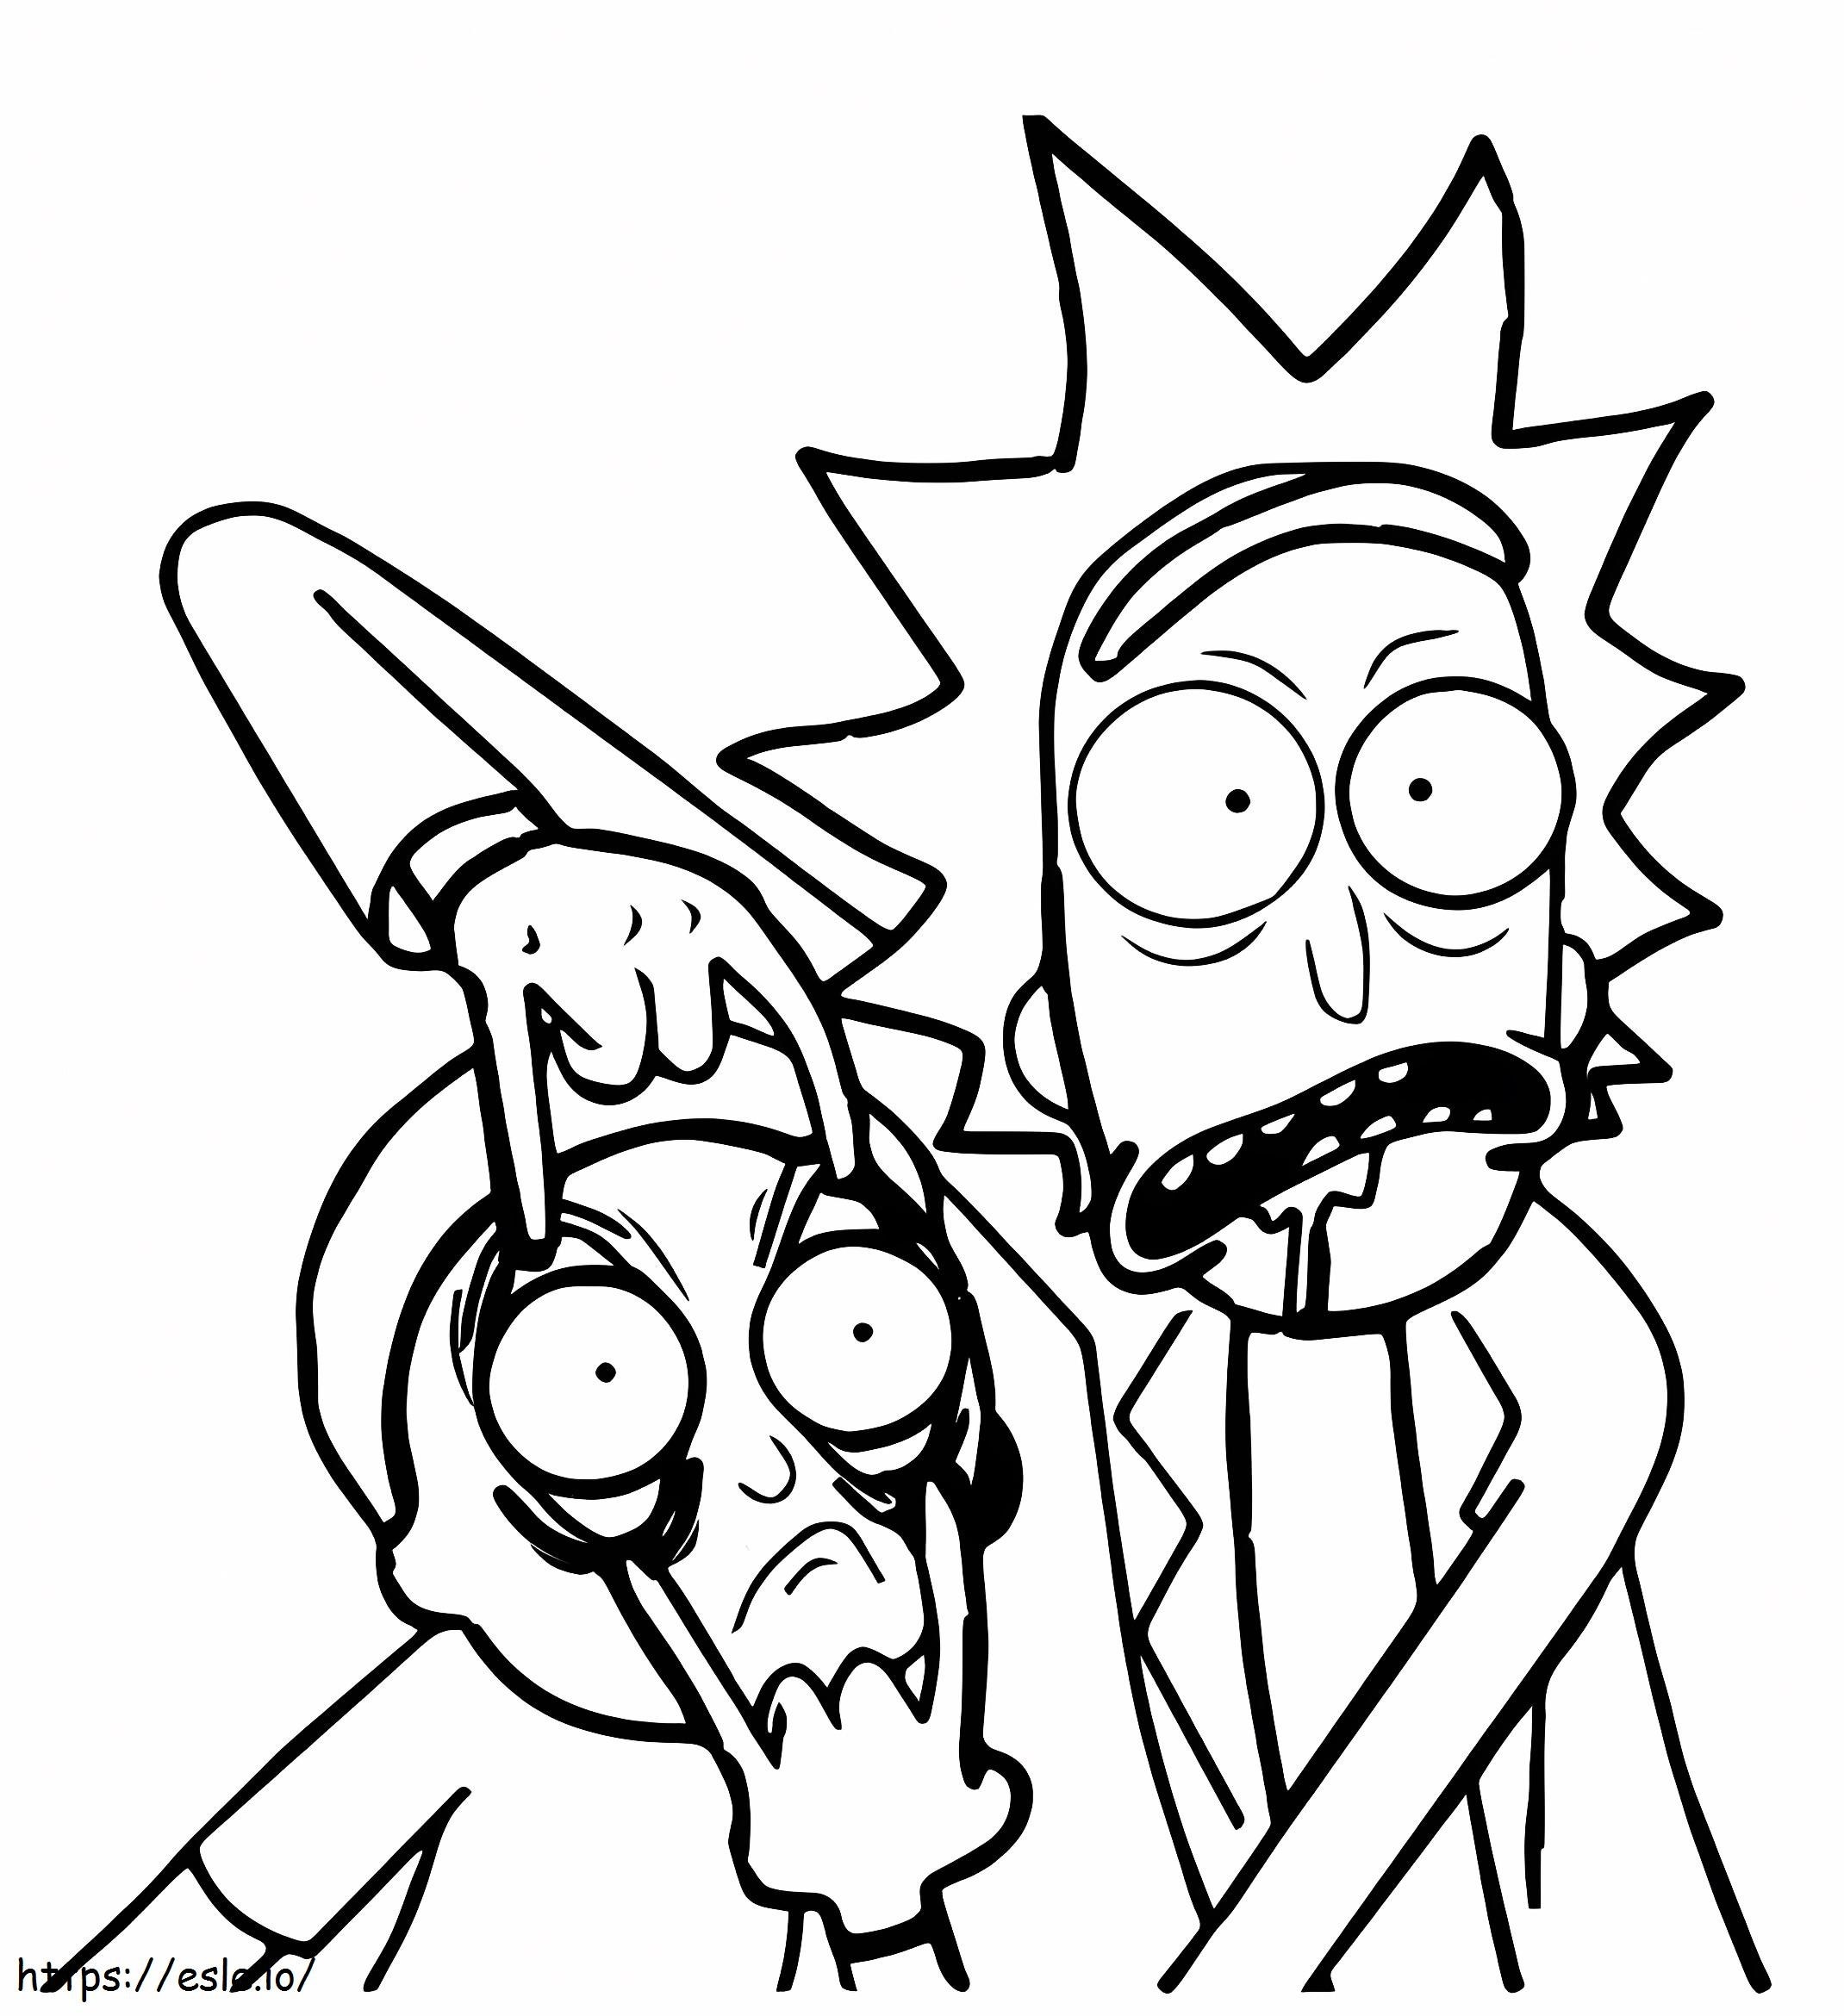 1528083107 Rick And Morty A4 coloring page